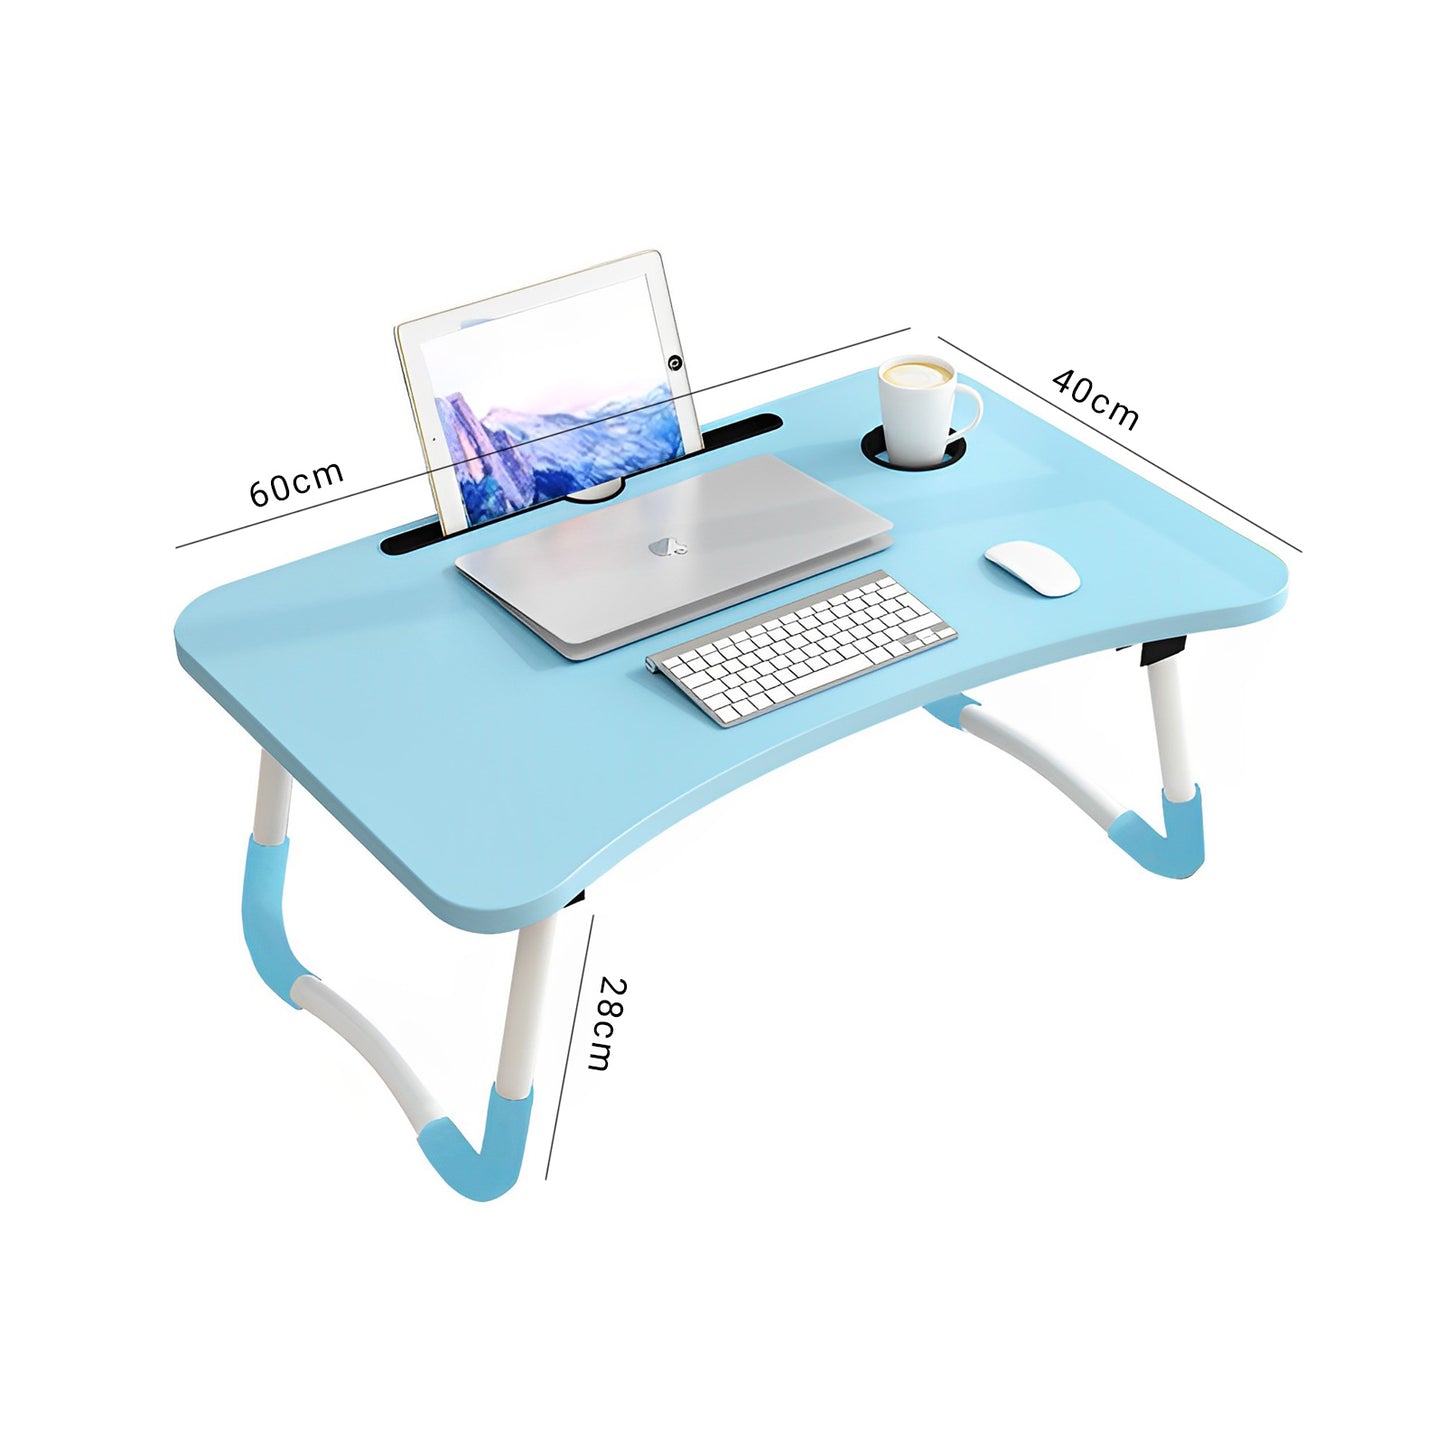 SOGA Blue Portable Bed Table Adjustable Foldable Bed Sofa Study Table Laptop Mini Desk with Notebook Stand Cup Slot Home Decor